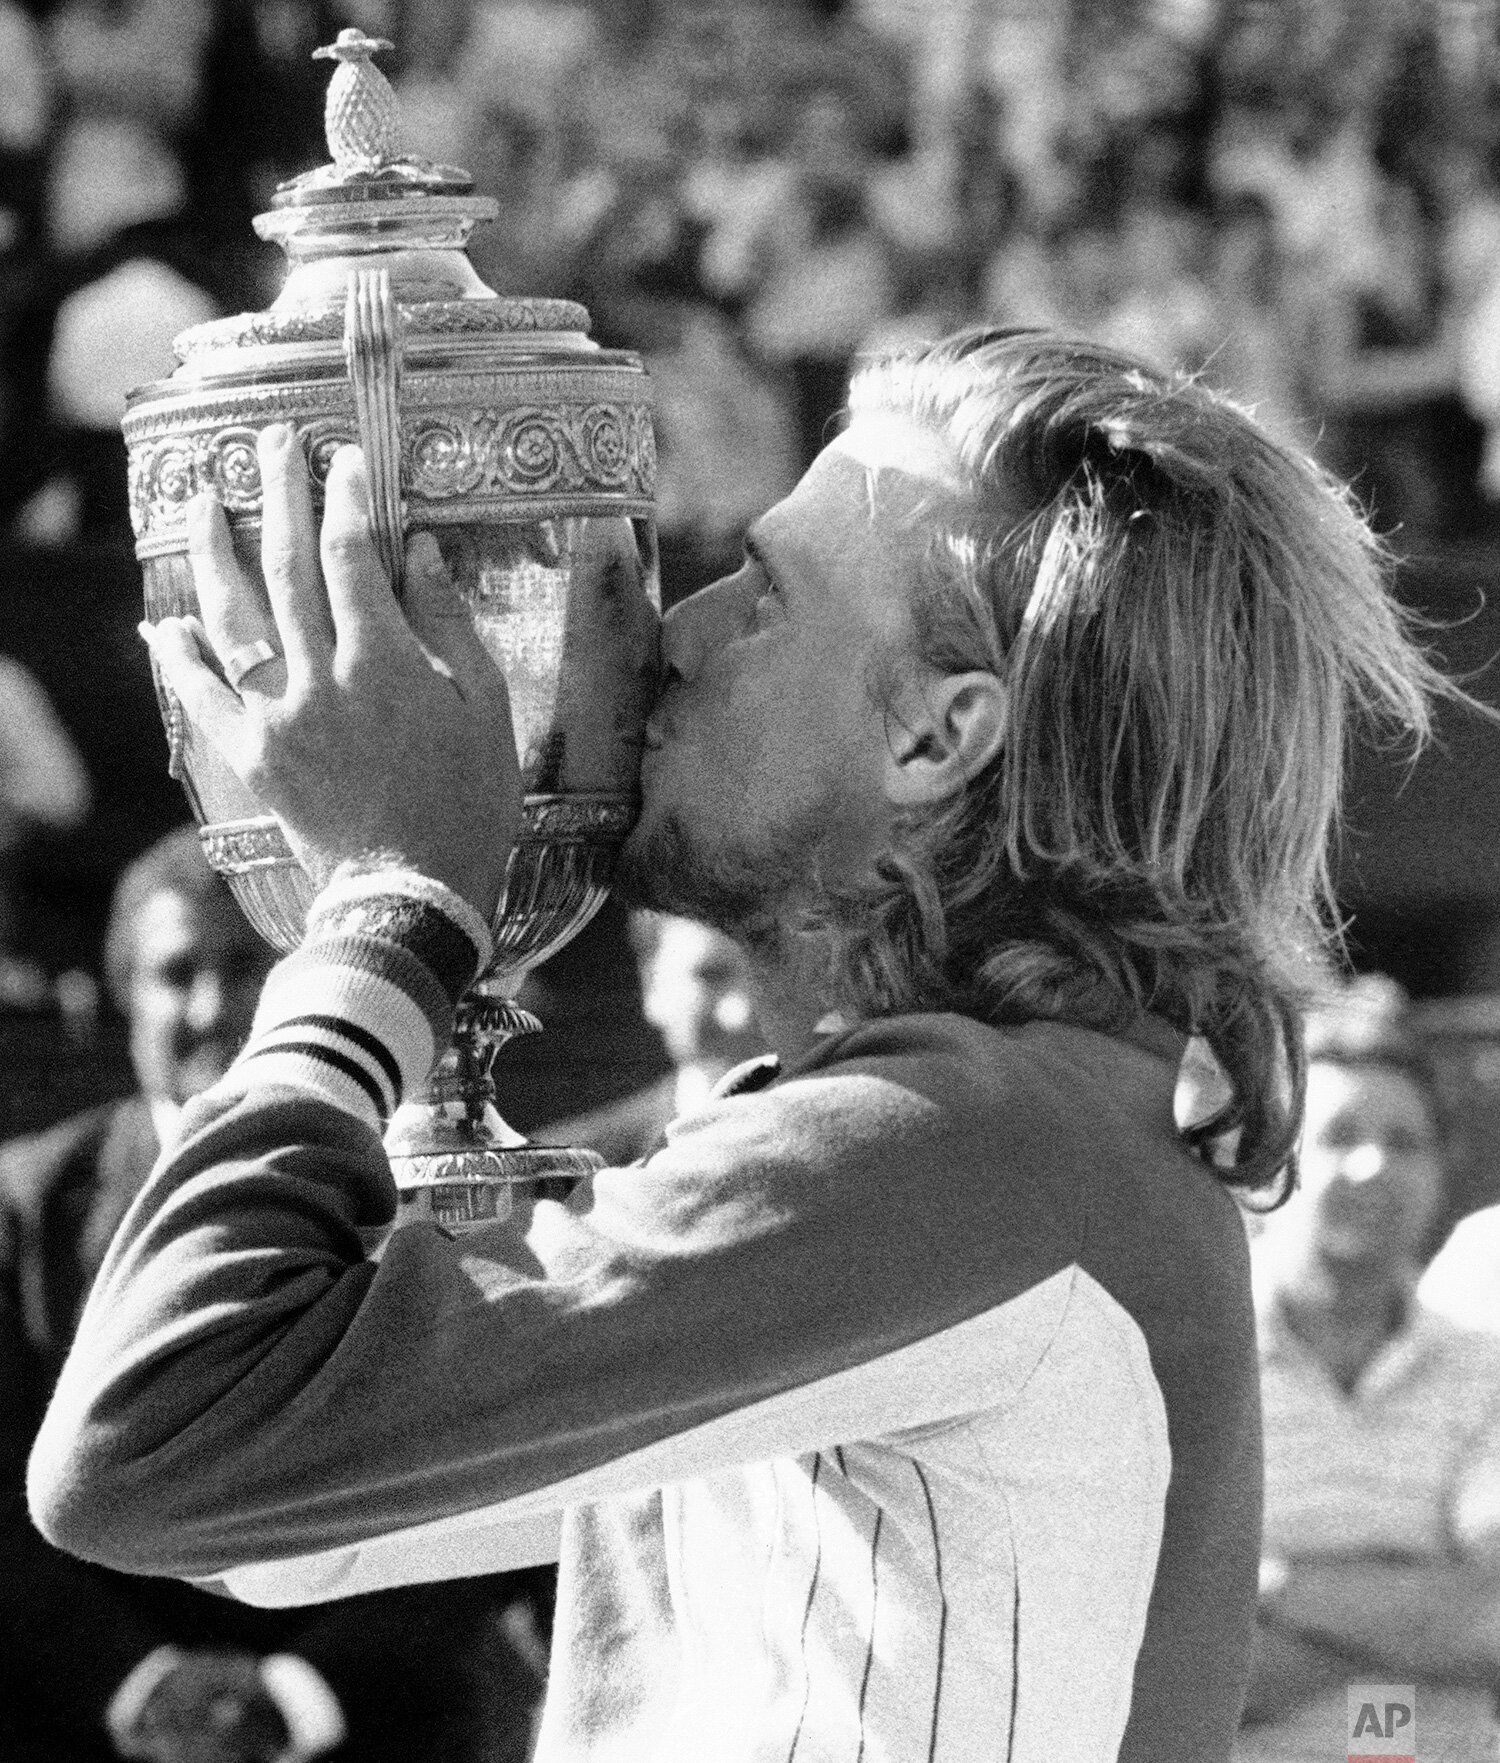  Sweden's Bjorn Borg kisses his trophy on Centre Court at Wimbledon, July 2, 1974, after beating Jimmy Connors of the United States, 3-6, 6-2, 6-1, 5-7, 6-4 to retain the men's singles title. (AP Photo) 